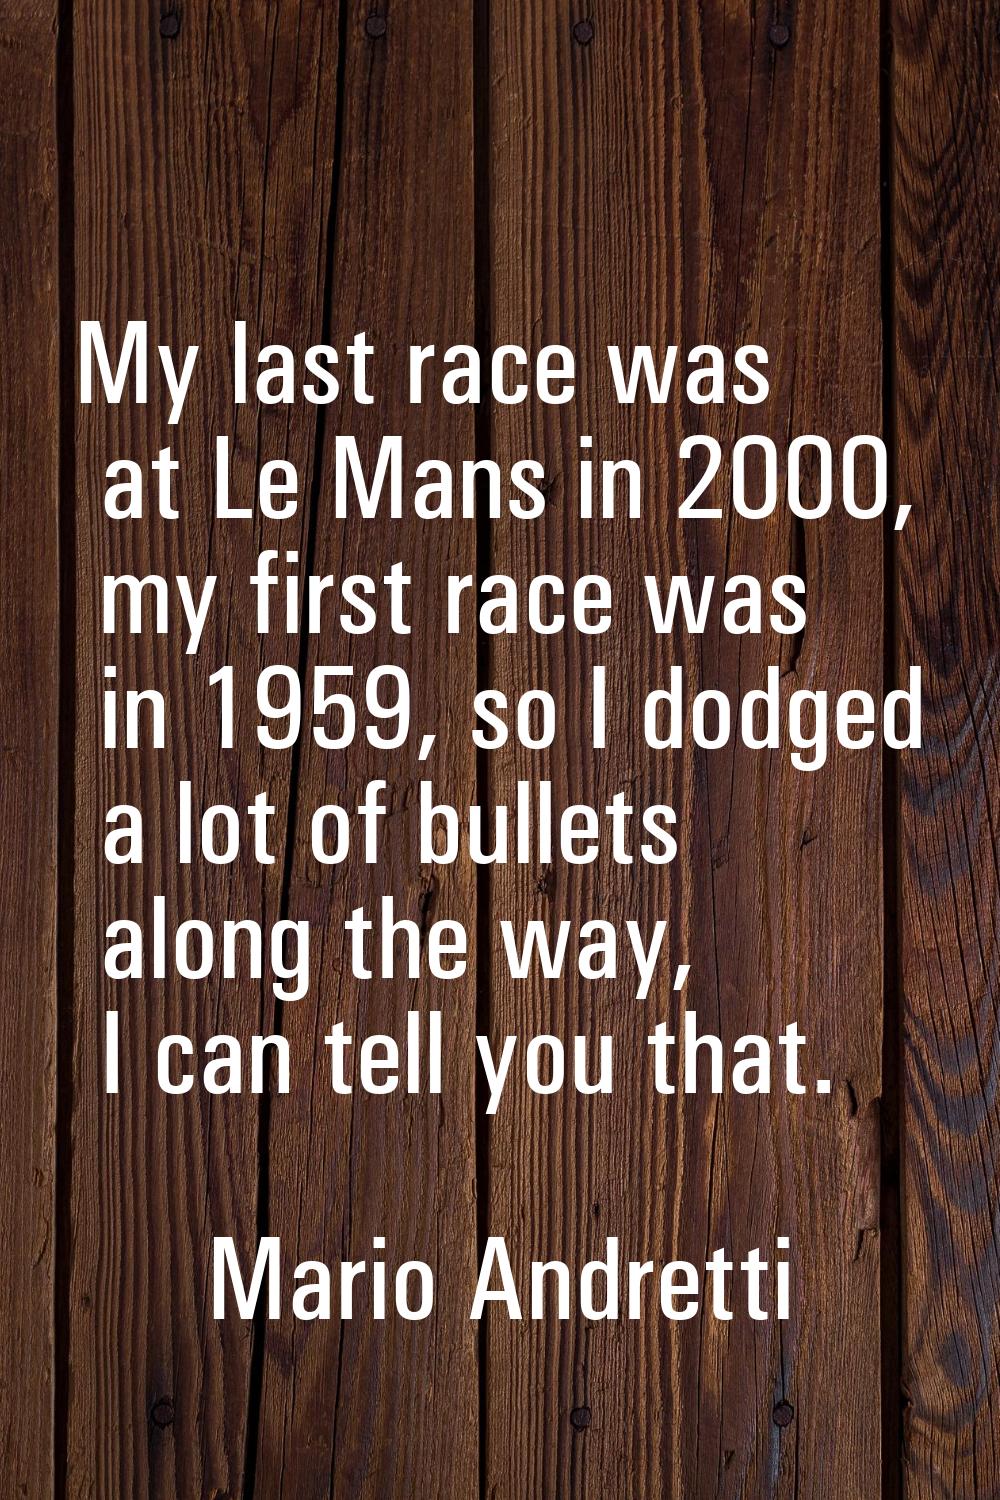 My last race was at Le Mans in 2000, my first race was in 1959, so I dodged a lot of bullets along 